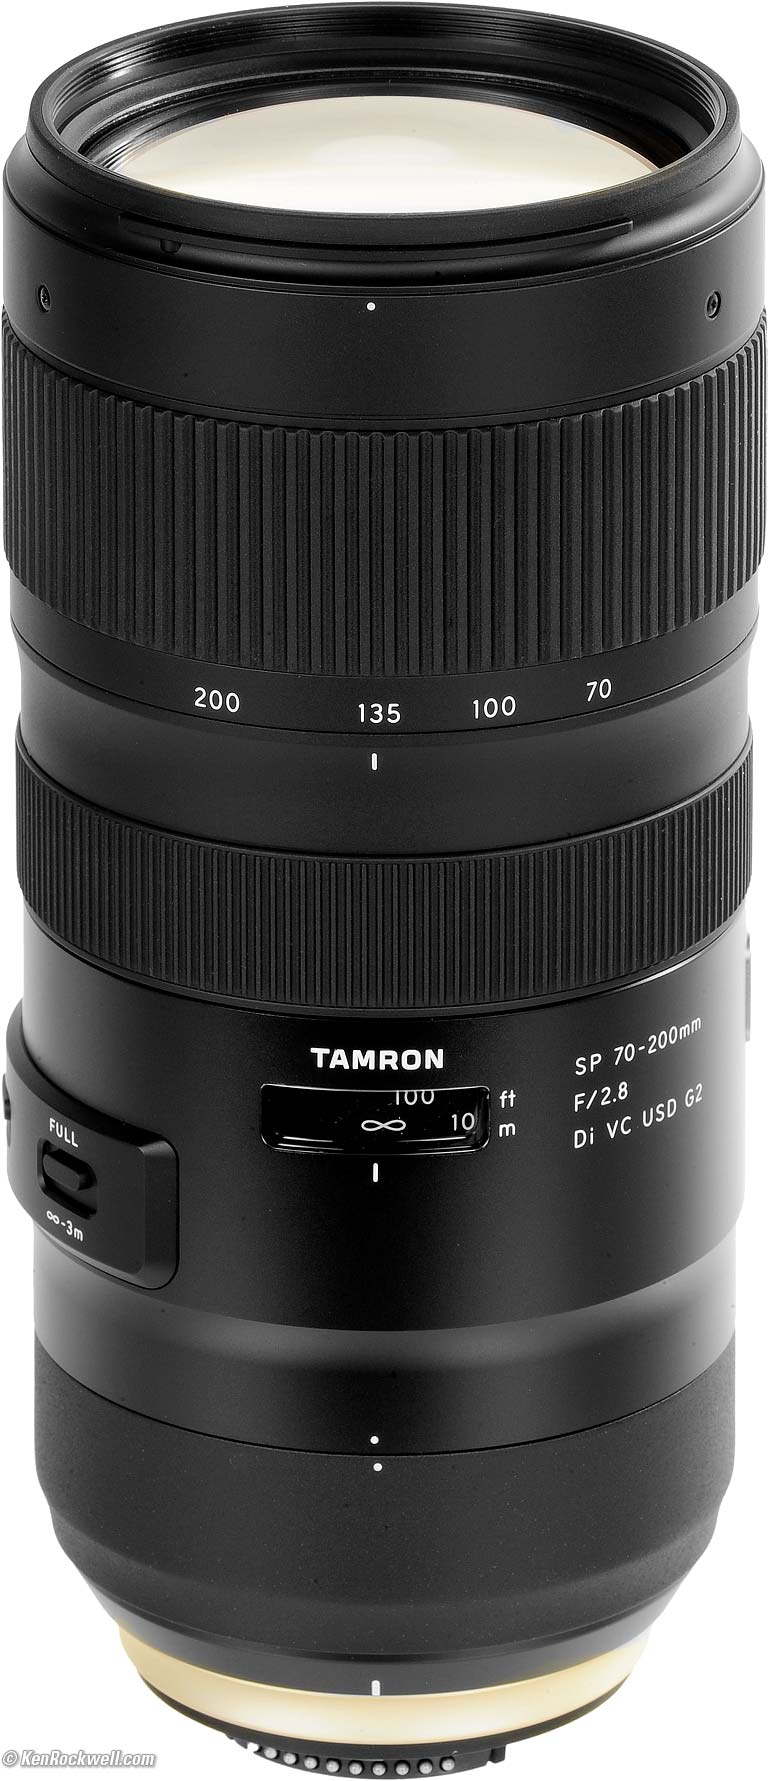 Tamron Sp 70 200mm F 2 8 Vc G2 Review